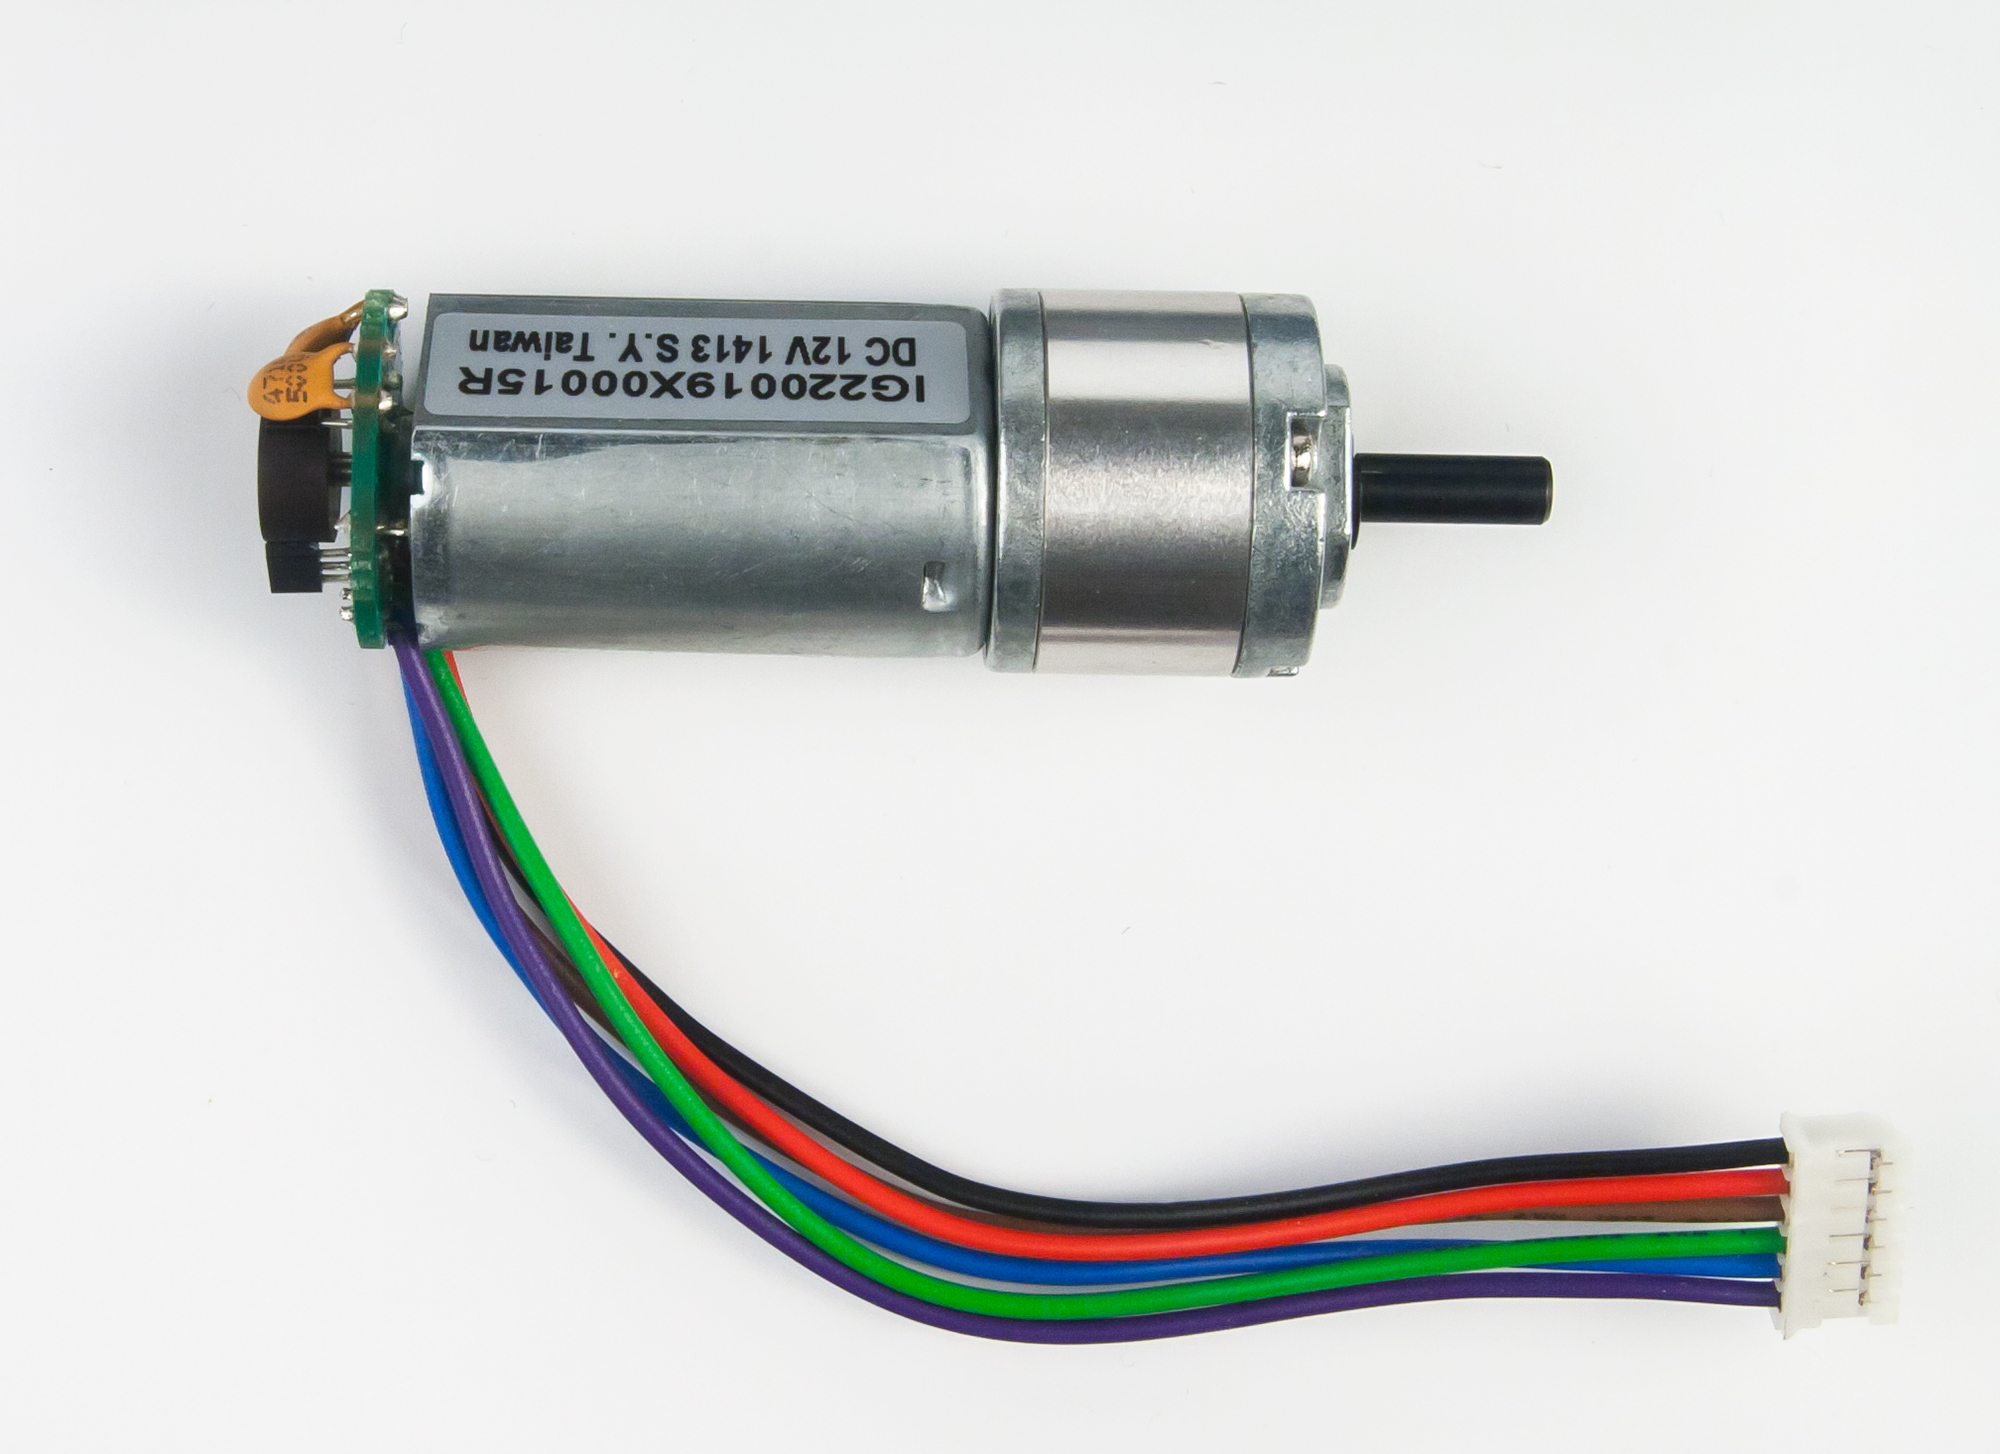 Figure 7.3. DC Motor with gearhead and bi-phase tachometer.